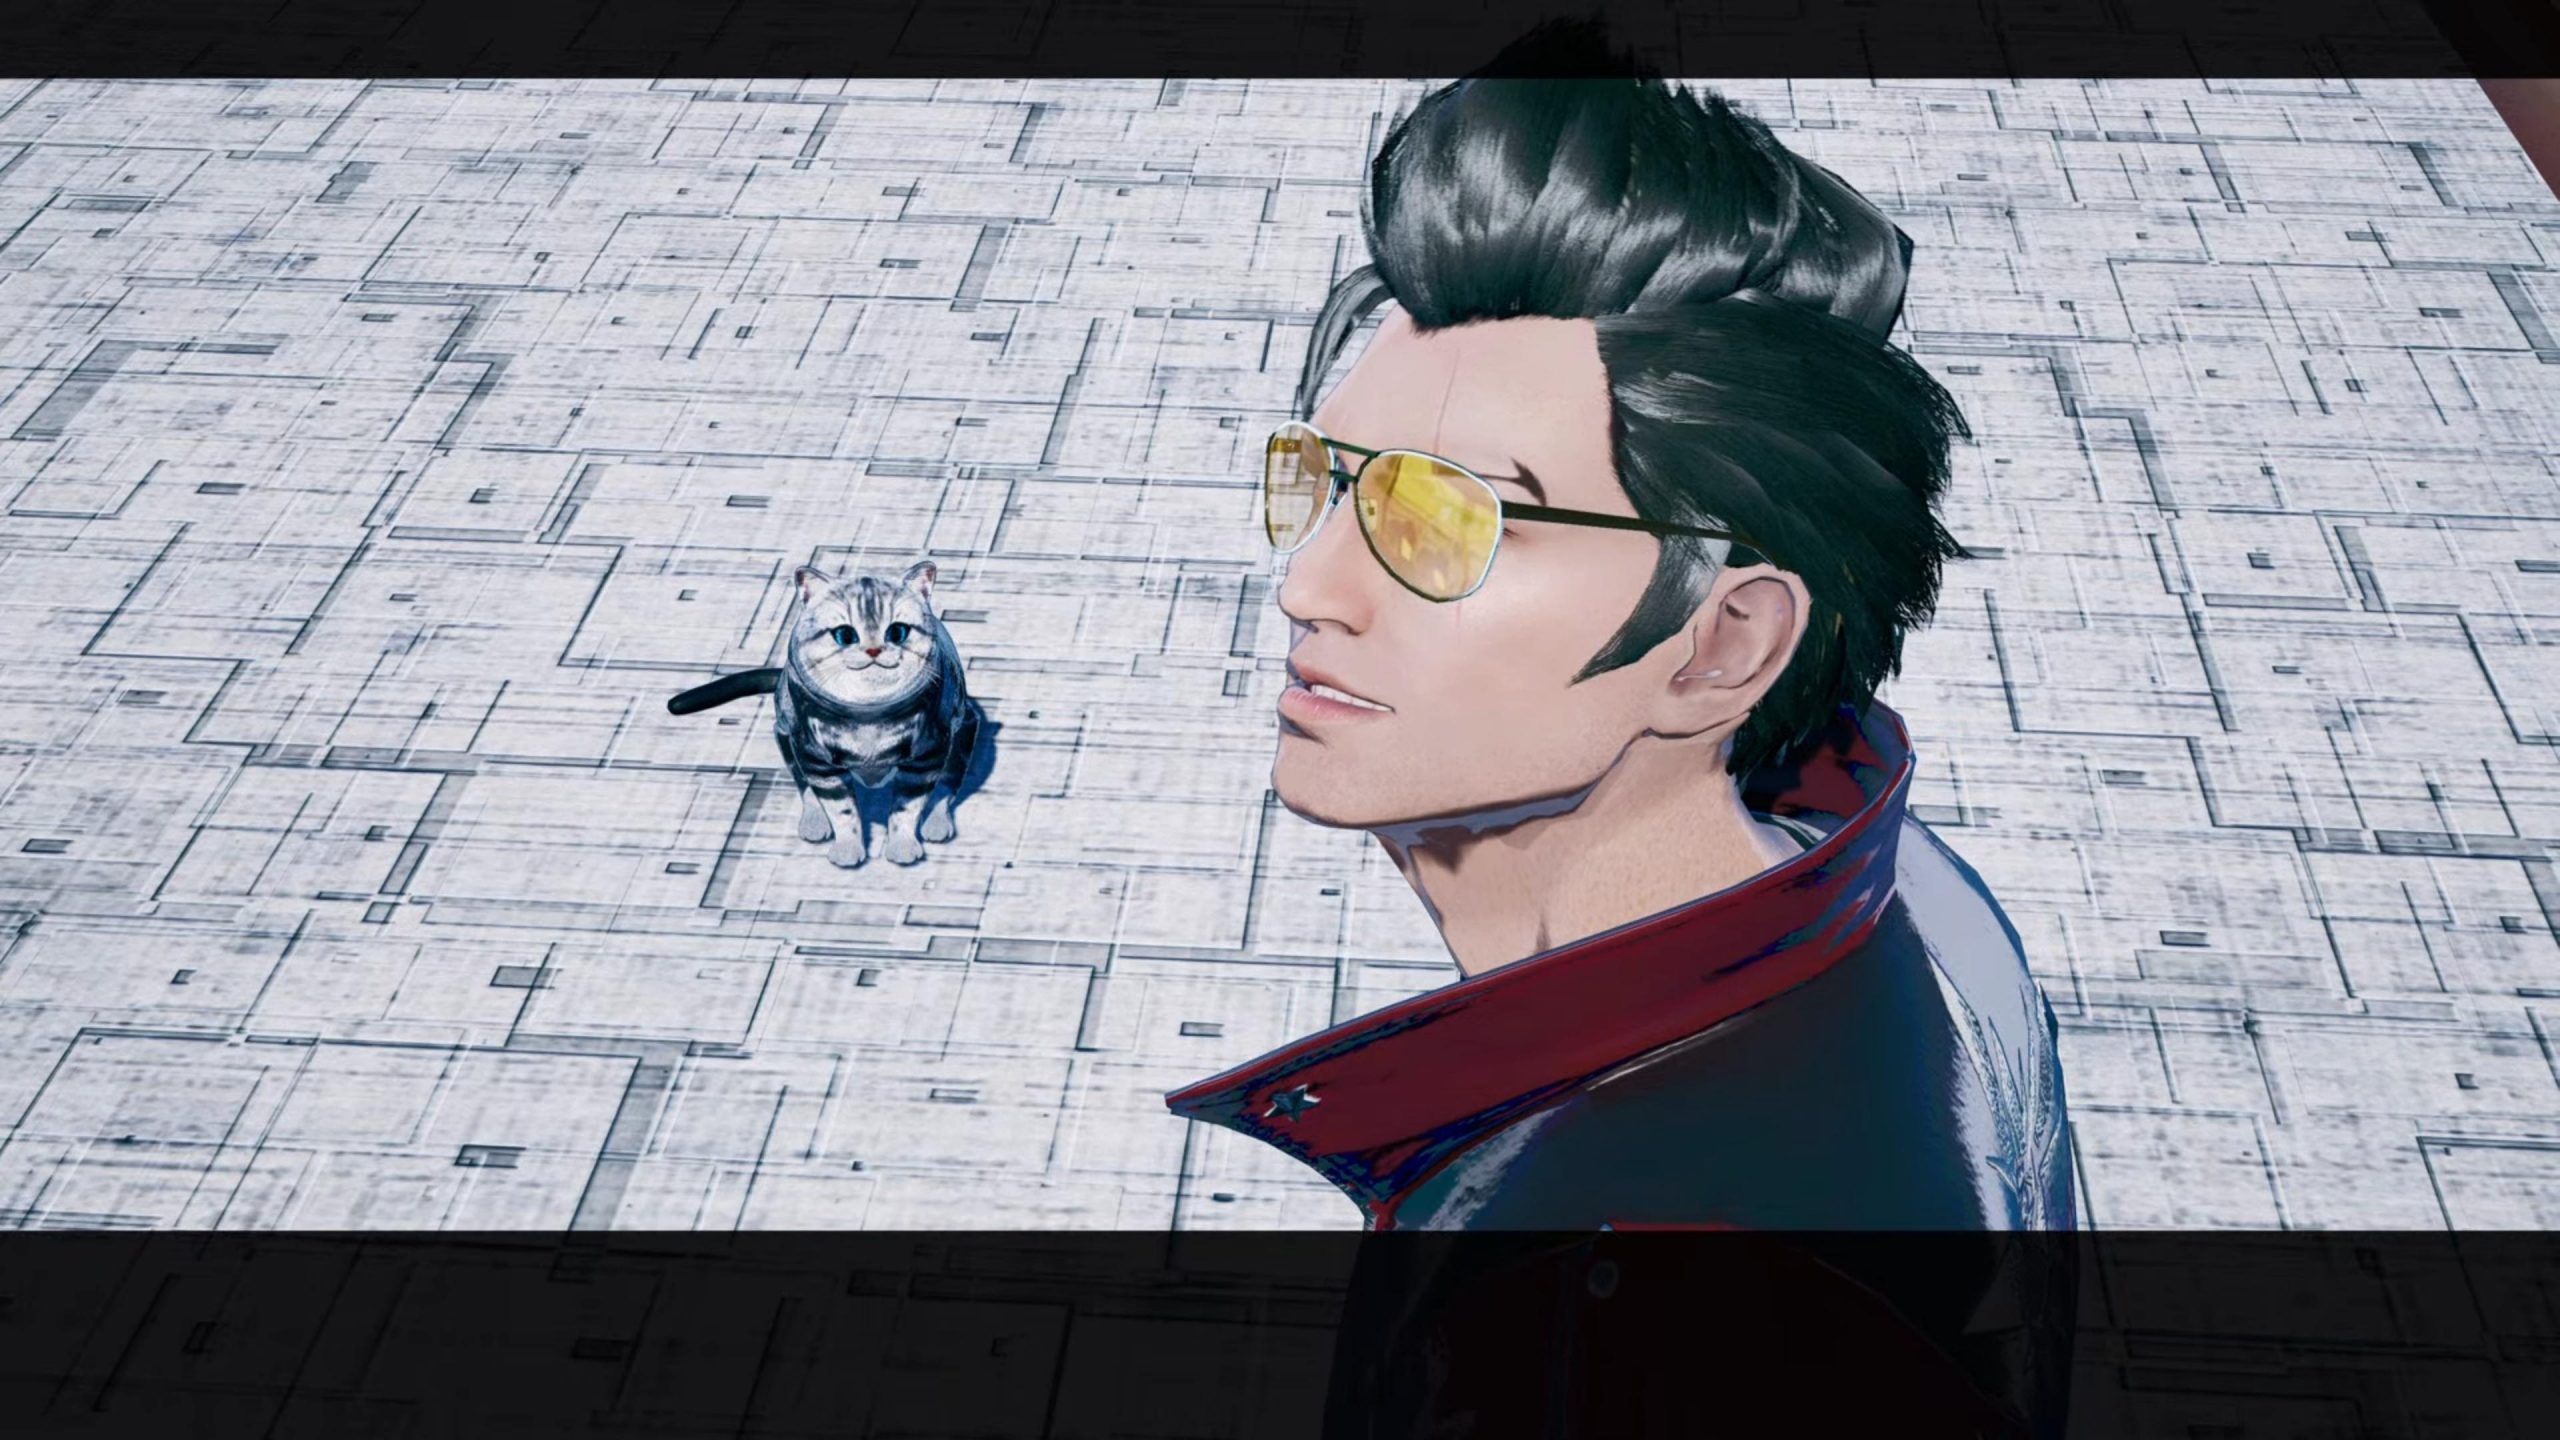 A screenshot from No More Heroes III. Travis stands in the foreground, seen from the shoulders up. He's looking to the top left. Next to him is a small tabby cat.